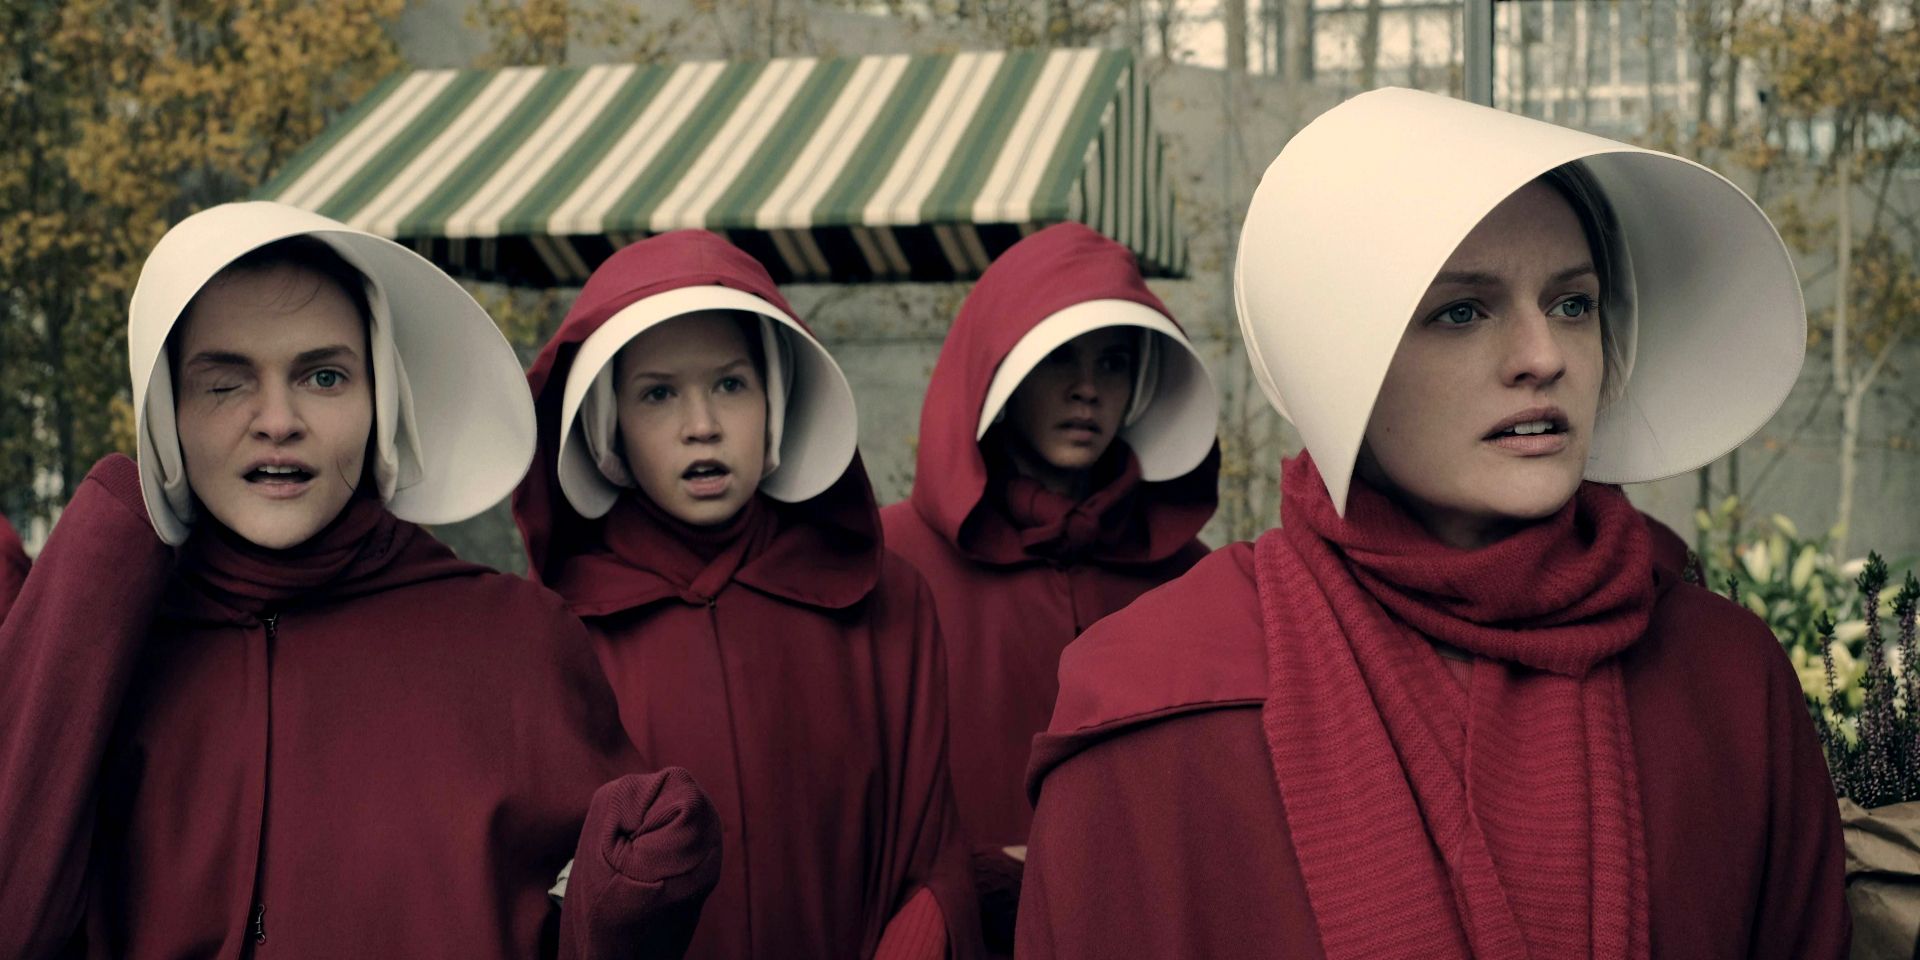 Offred and other handmaids in The Handmaids Tale